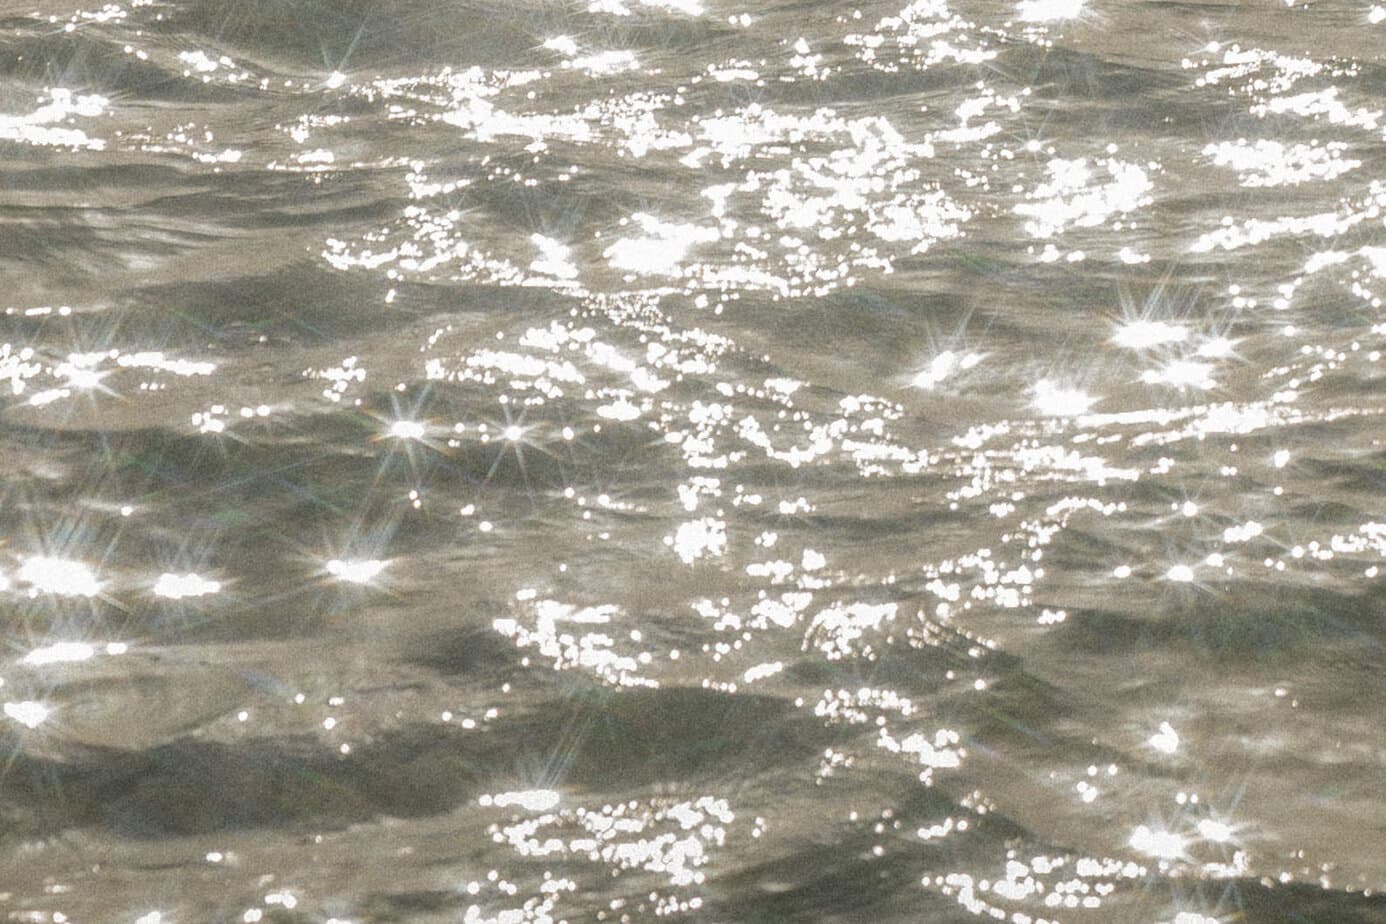 Sparkles on the water during sunrise.